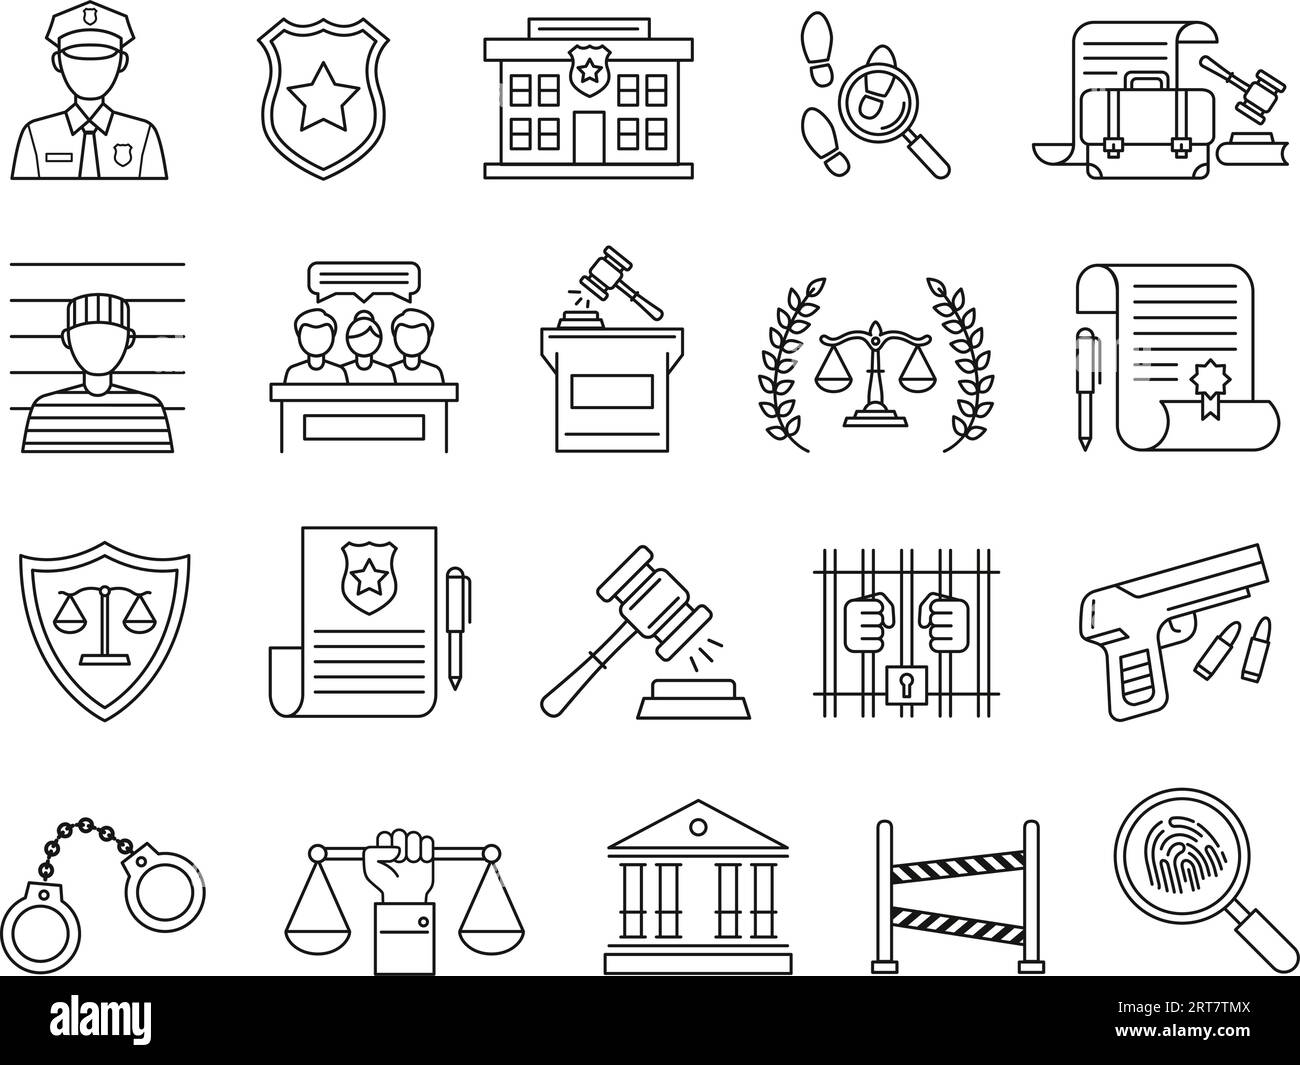 Law and judgment icons. Policeman and convicted felon, police office and court building, scales of justice and judges gavel vector symbols set Stock Vector